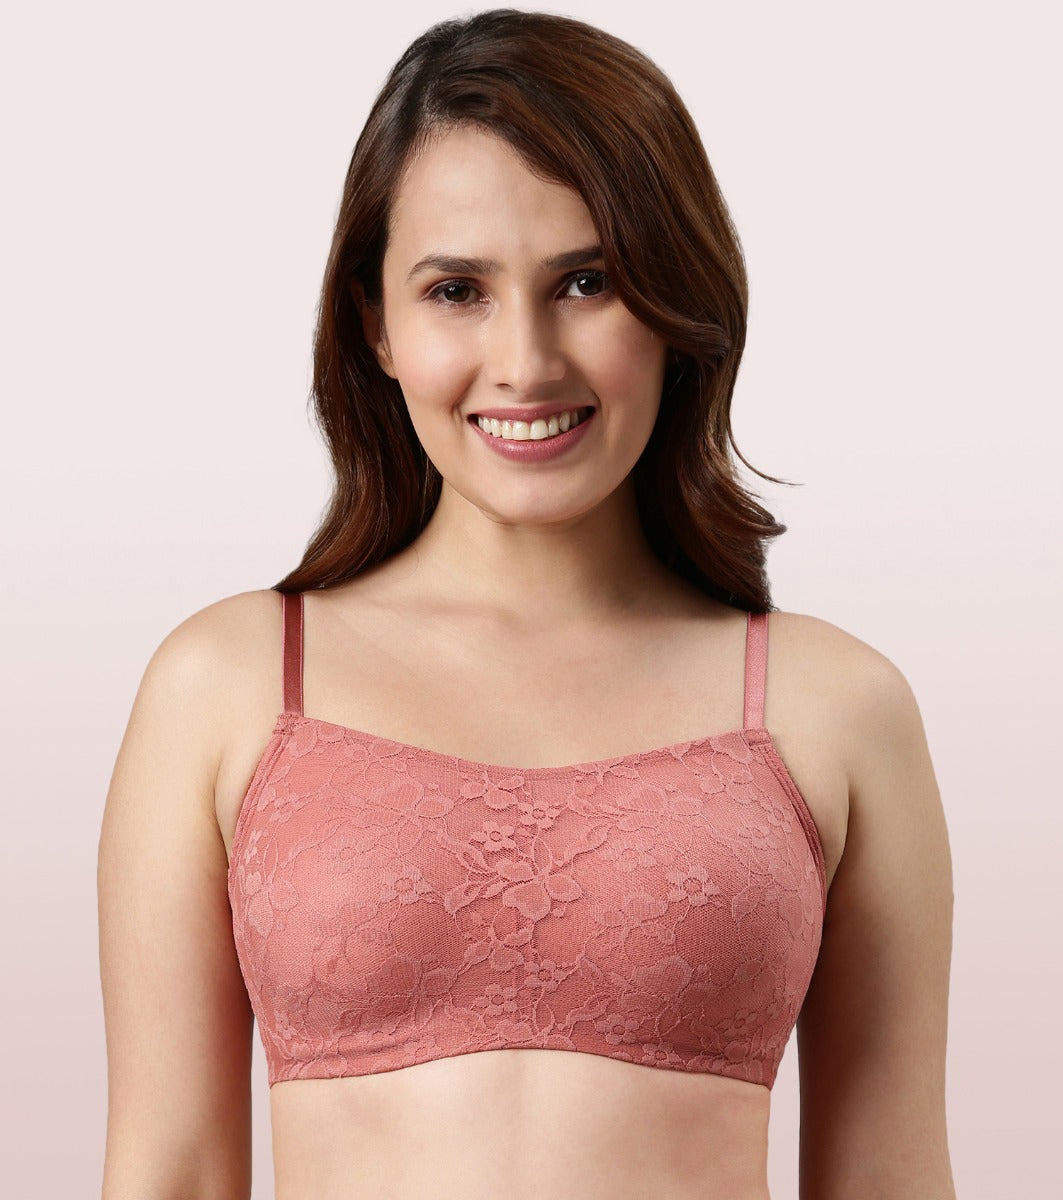 Enamor Non-Wired Racerback Strap Non Padded Womens Every Day Bra (Buff, 34B)